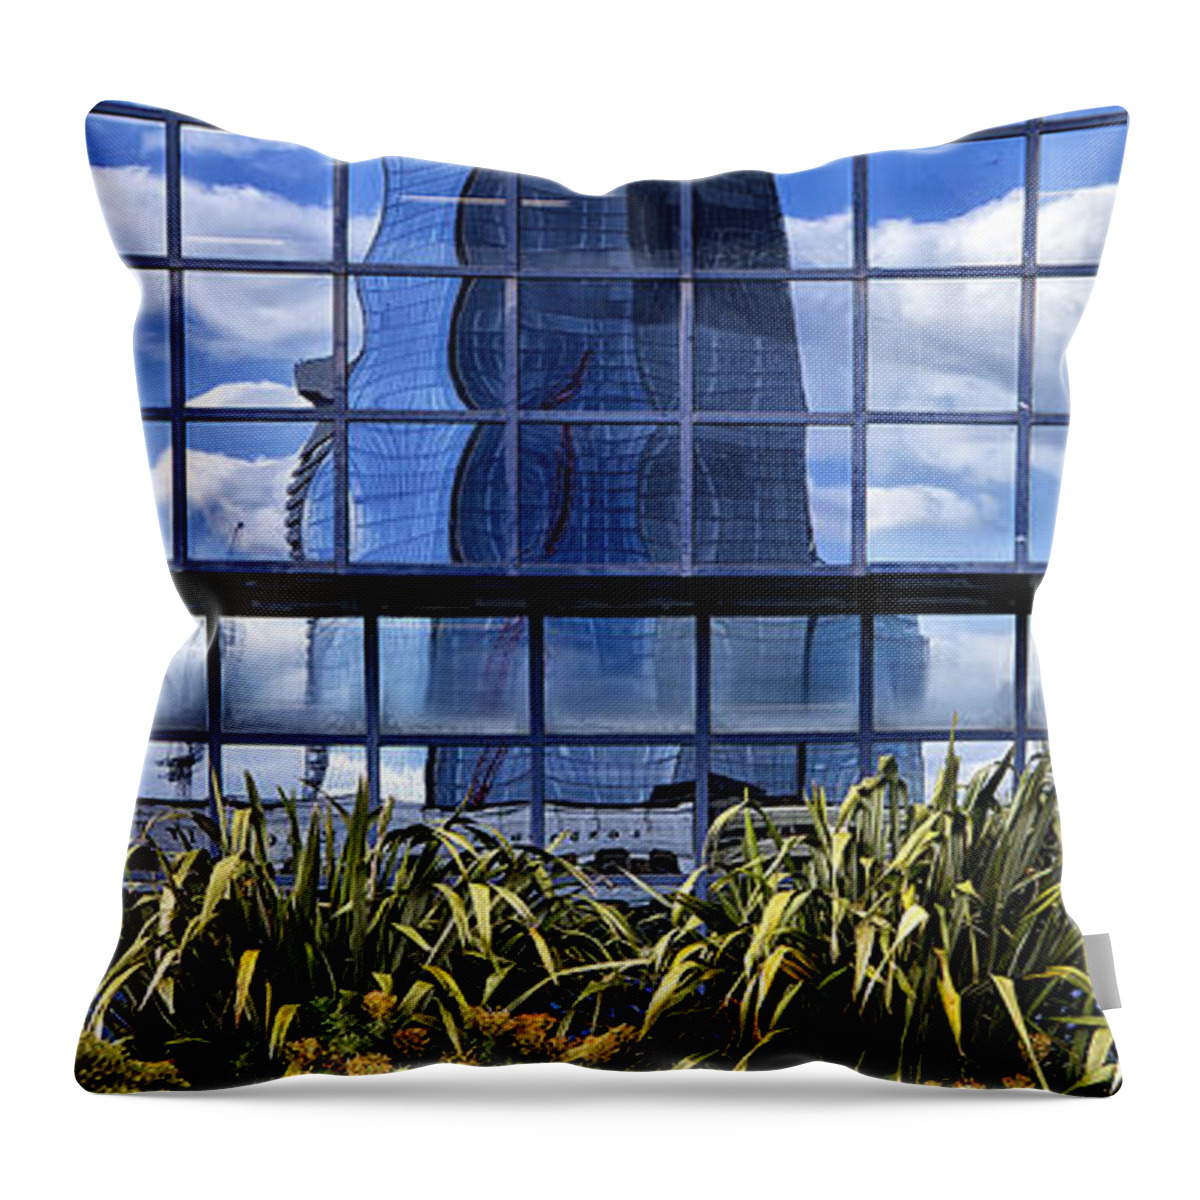 Facade Throw Pillow featuring the photograph The Shard by Shirley Mitchell